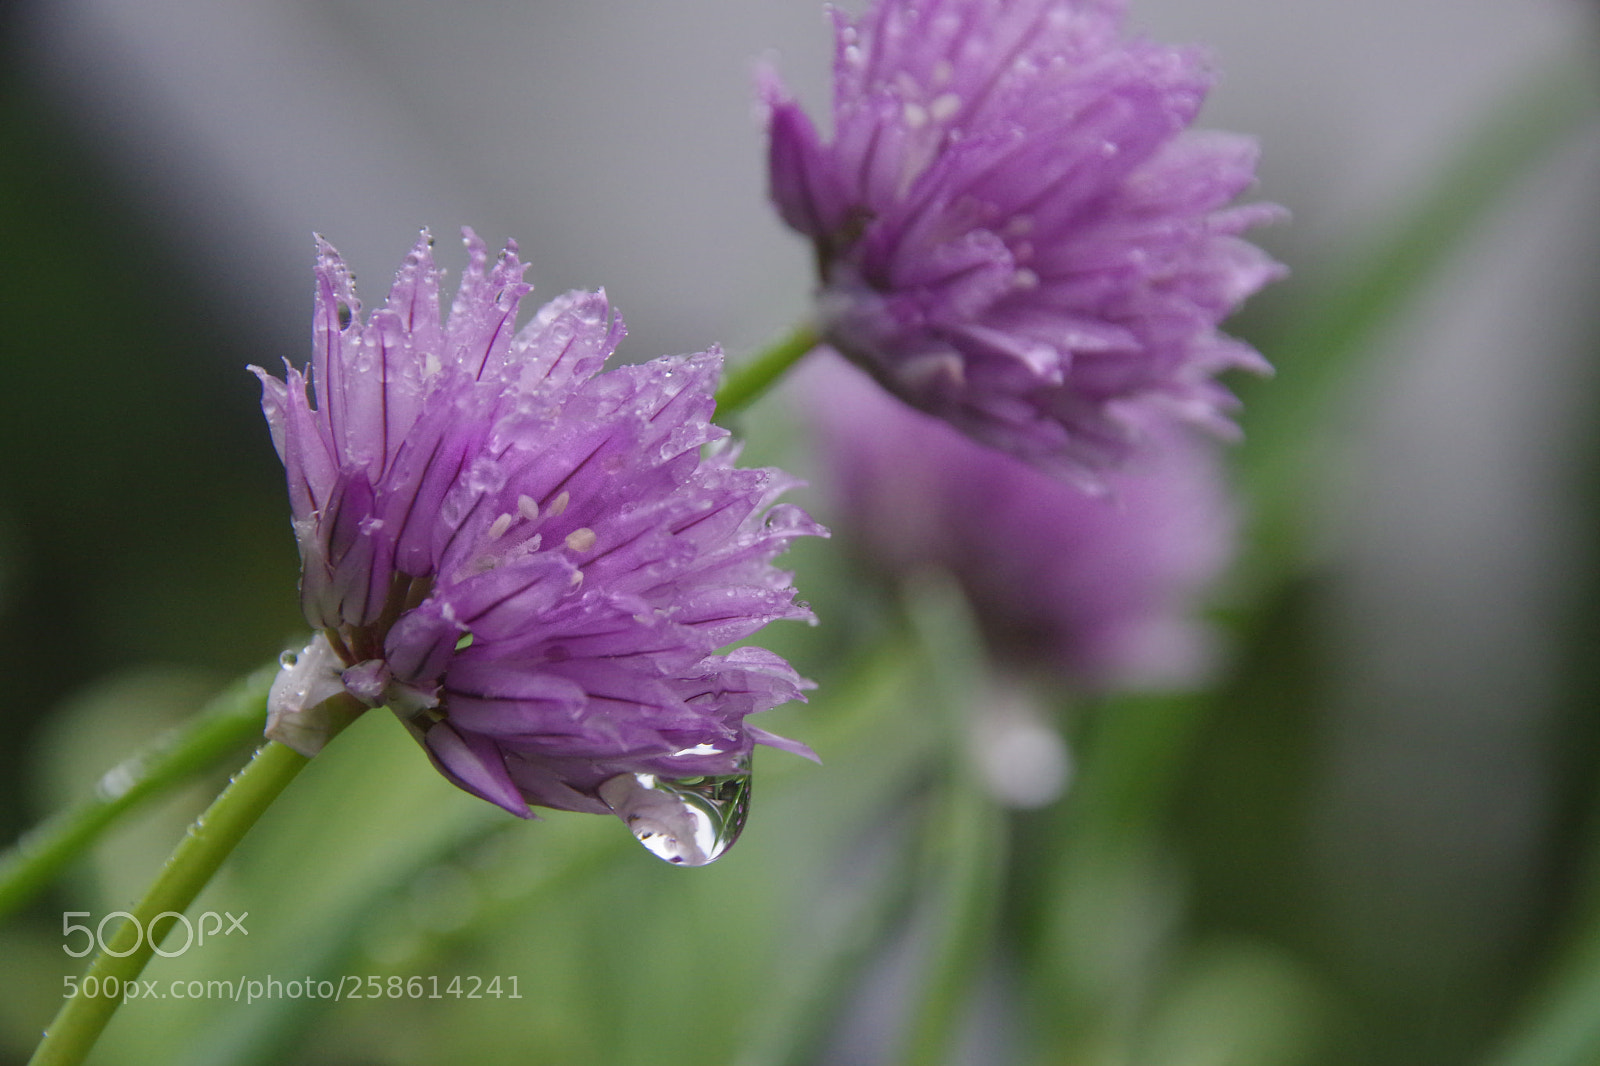 Pentax K-3 sample photo. After the rain photography